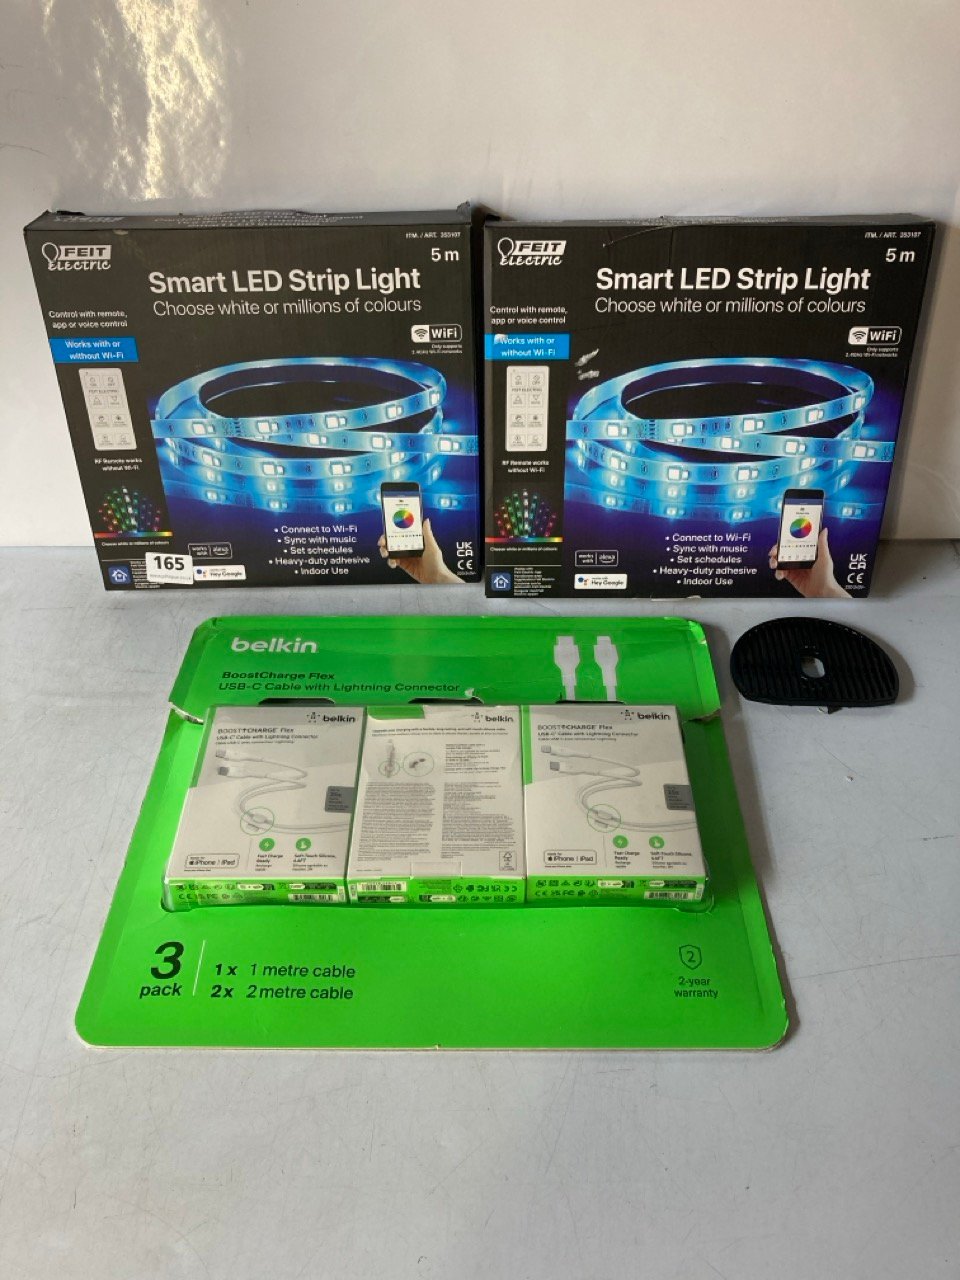 2 X SMART LED STRIP LIGHTS (5 METRES) TOGETHER WITH A BELKIN BOOST CHARGER FLEX